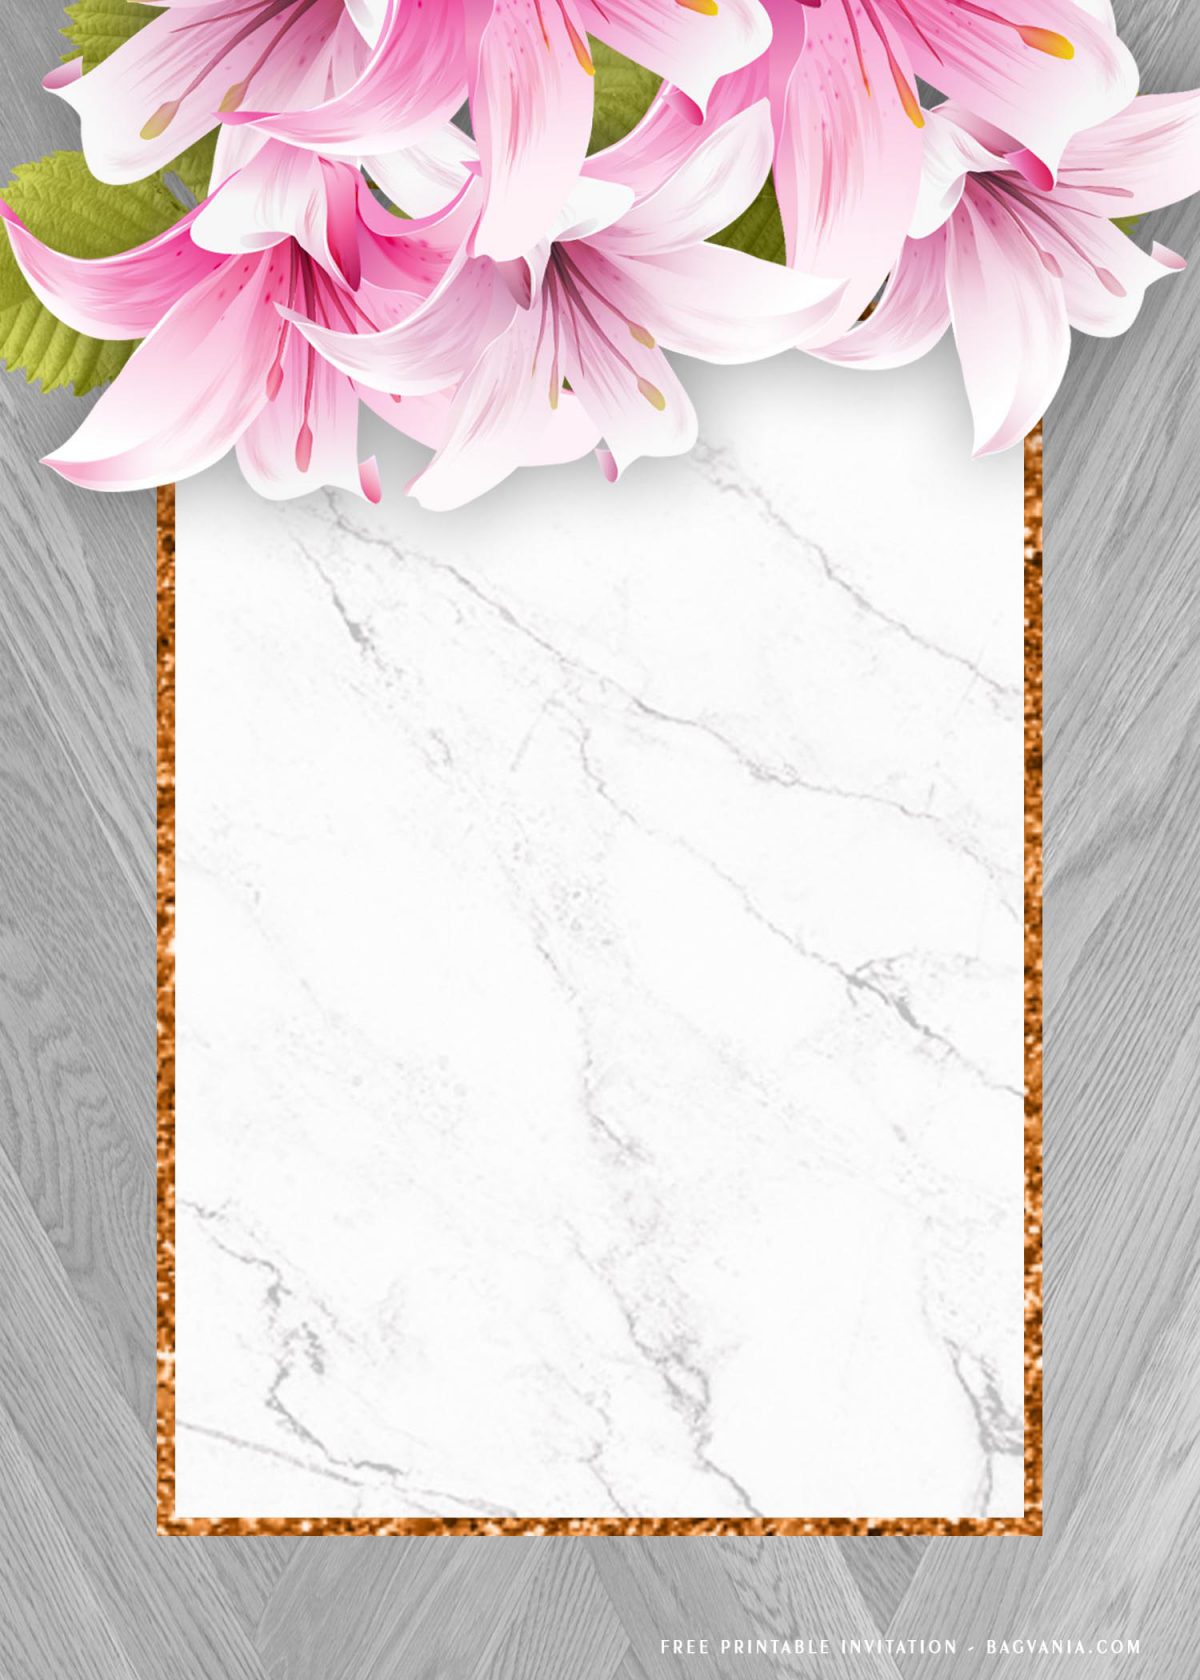 Free Printable Floral Frame On Wooden Baby Shower Invitation Templates With Portrait Design